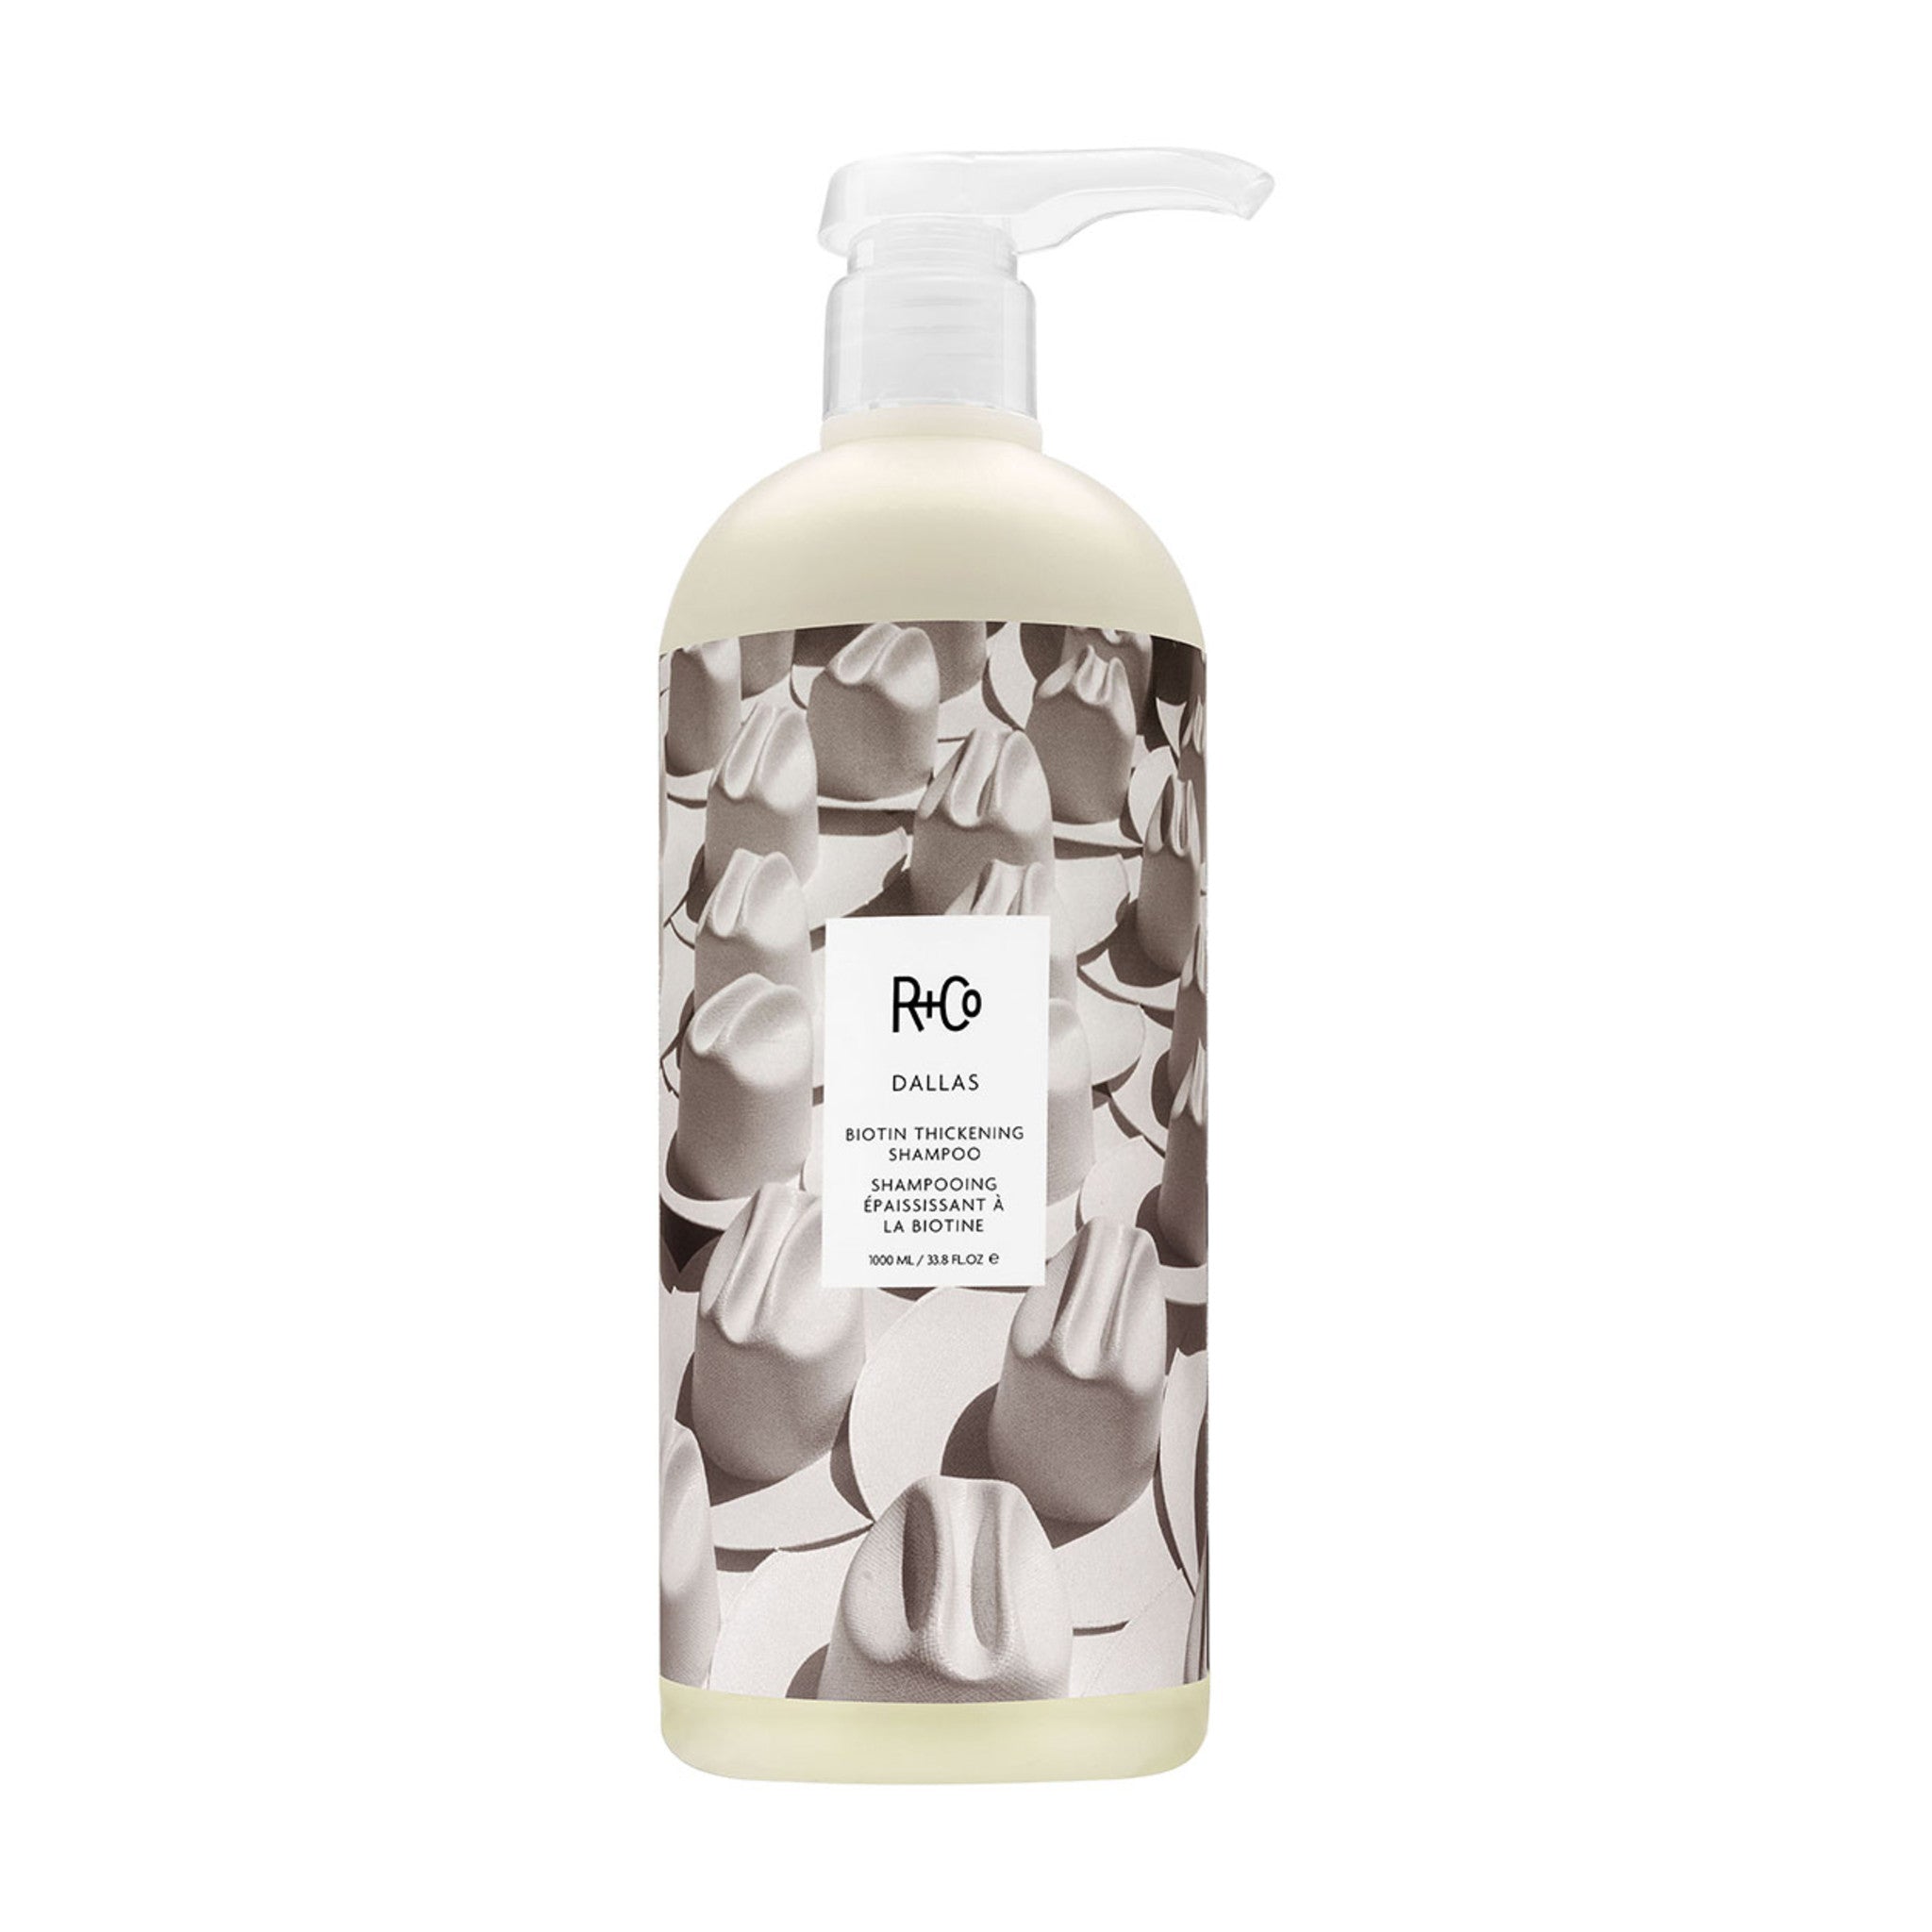 R+Co Travel Size Products - Buy More & Save More - FREE SHIP